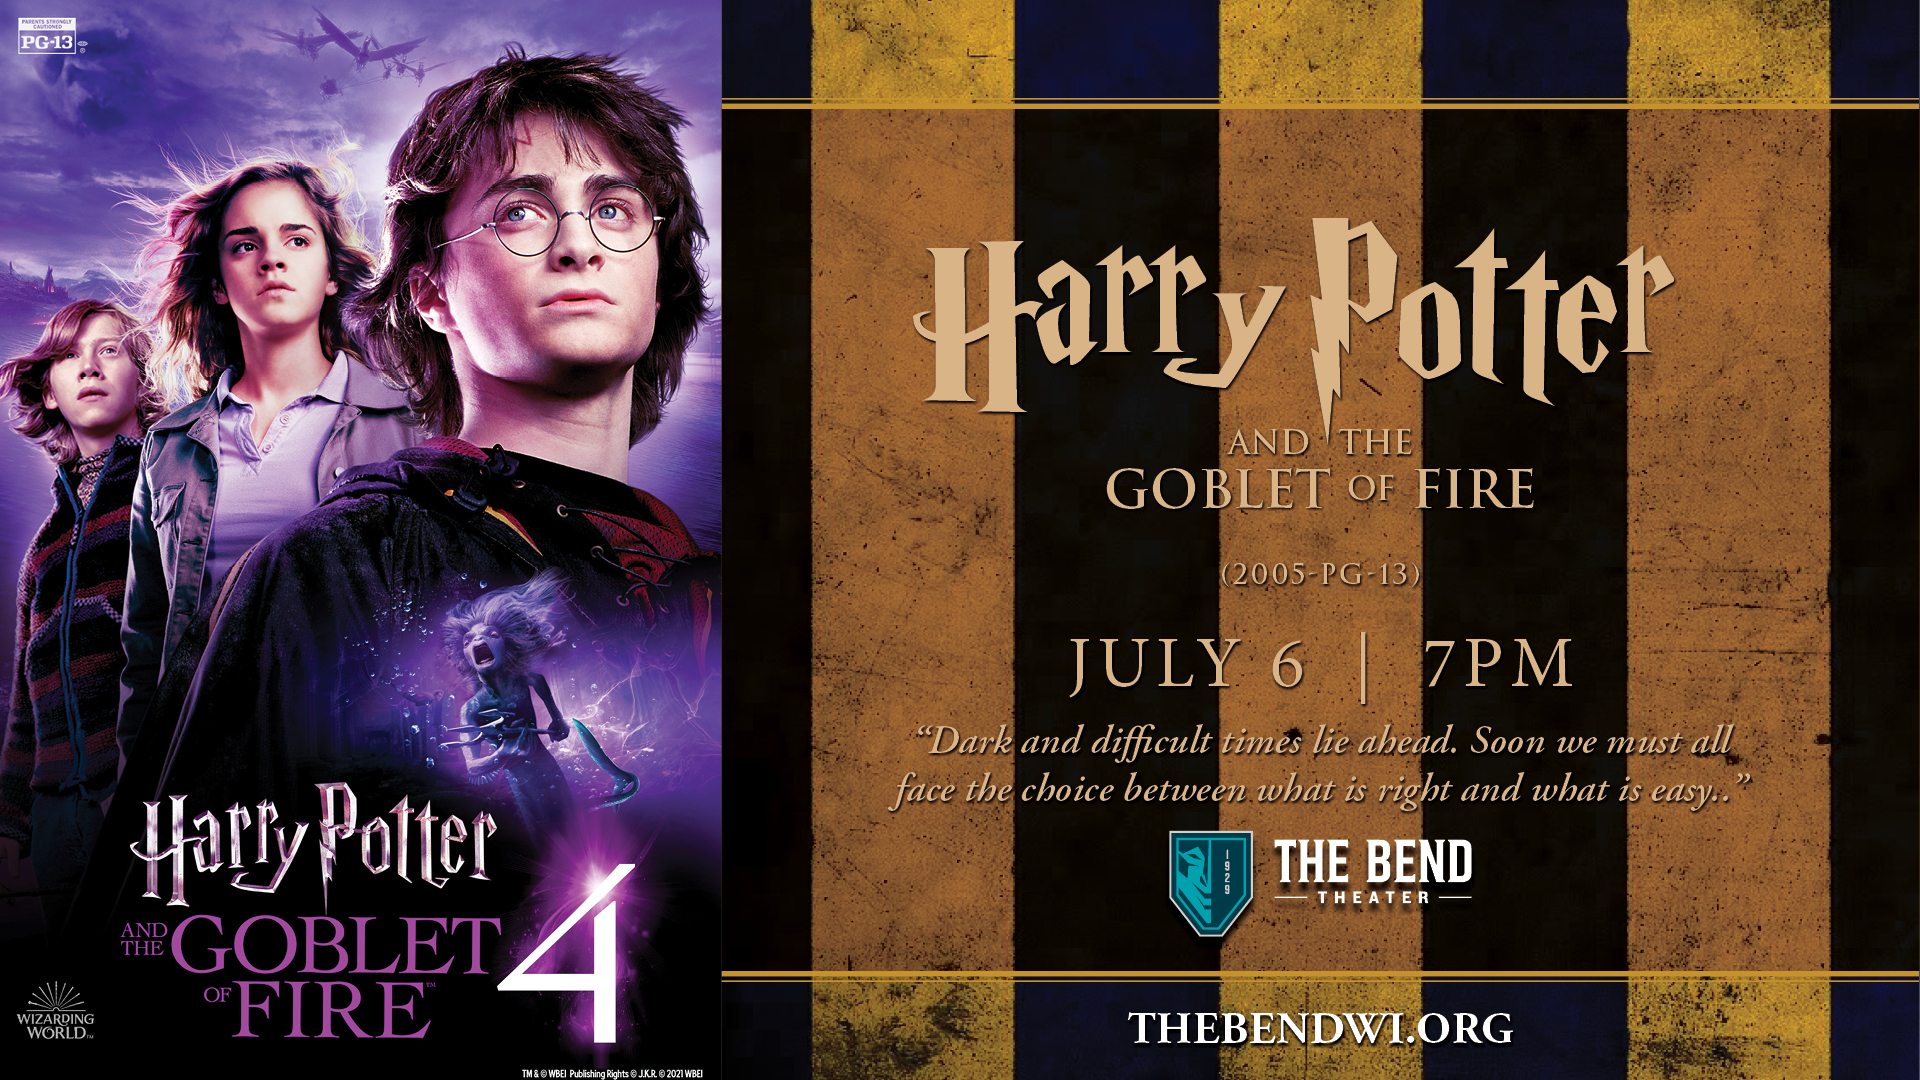 Wizarding World Nights at The Bend Theater: Harry Potter and The Goblet of Fire (2005 - PG-13)